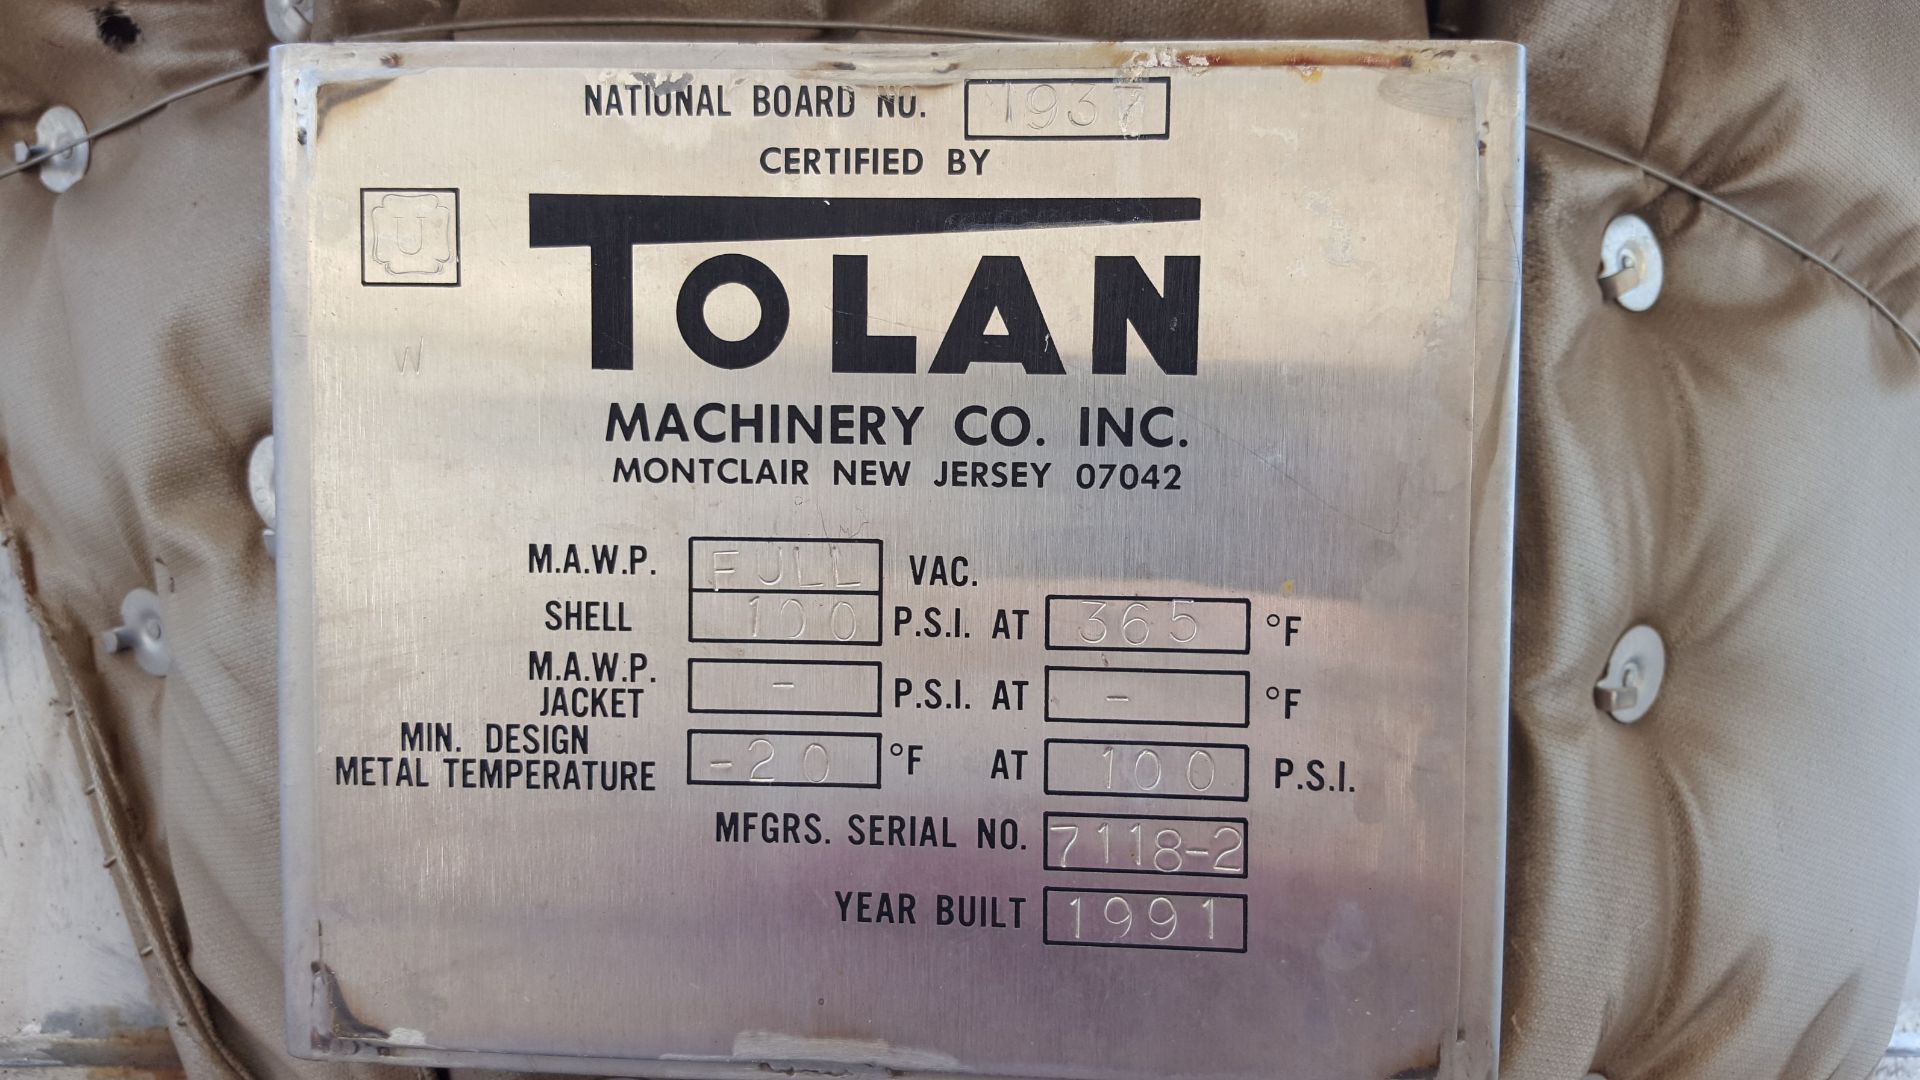 Tolan Machinery Co. Stainless Steel Vessel, 42" straight side x 21" dia. - Image 5 of 6